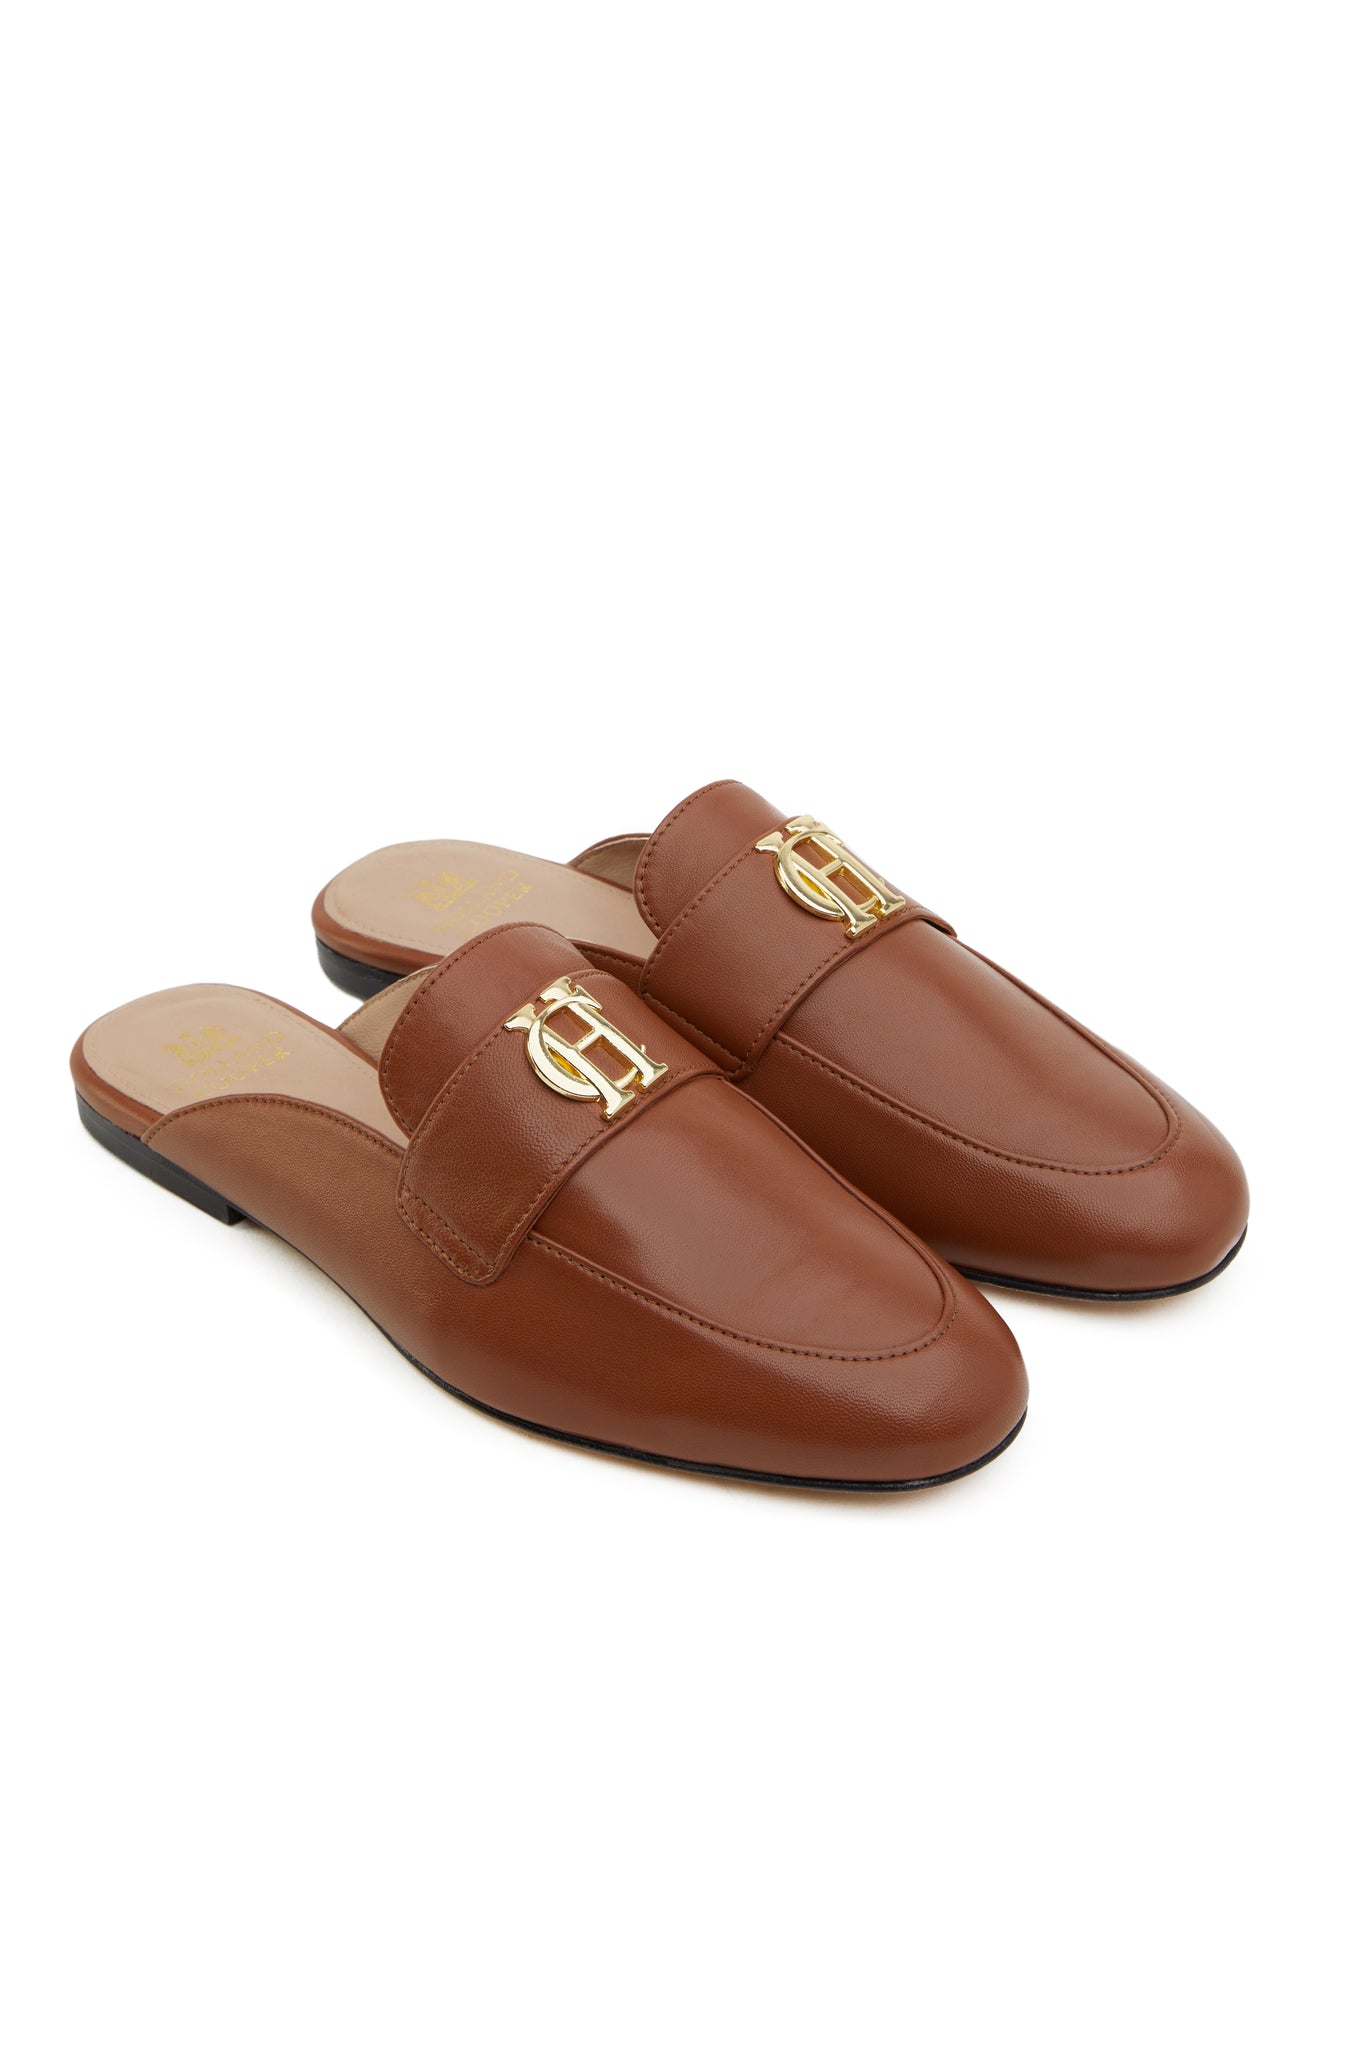 tan leather backless loafers with a slightly pointed toe and gold hardware to the top and gold foil branding to inner sole